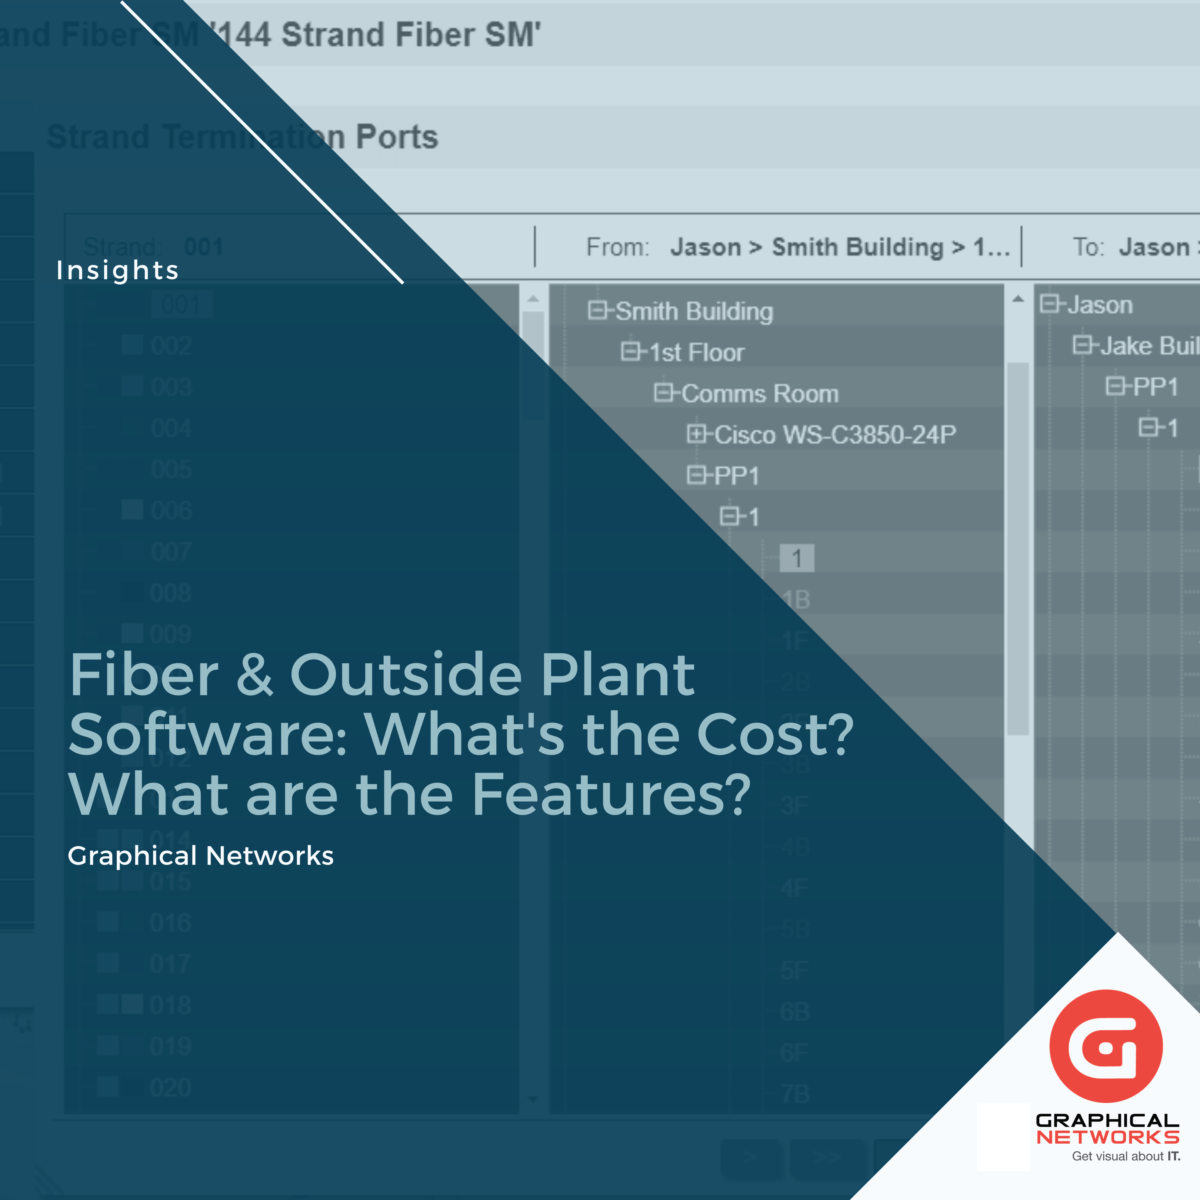 Fiber & Outside Plant Software: What’s the Cost? What are the Features?